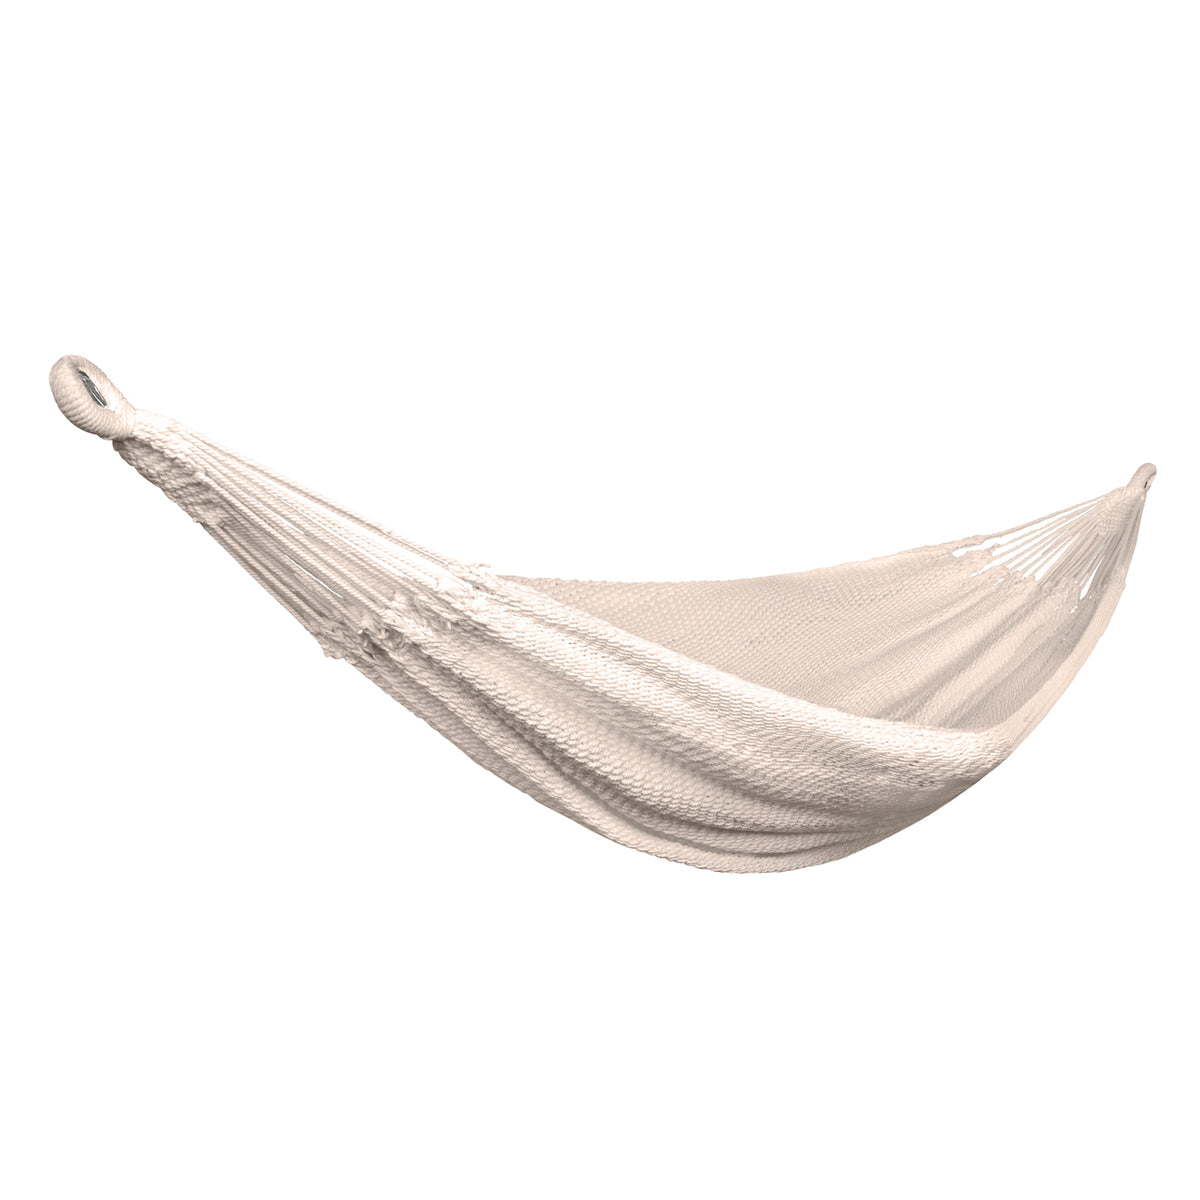 Bliss Hammocks 60-inch Wide Brazilian Style Oversized Rope Hammock with Braided Rope Ends.